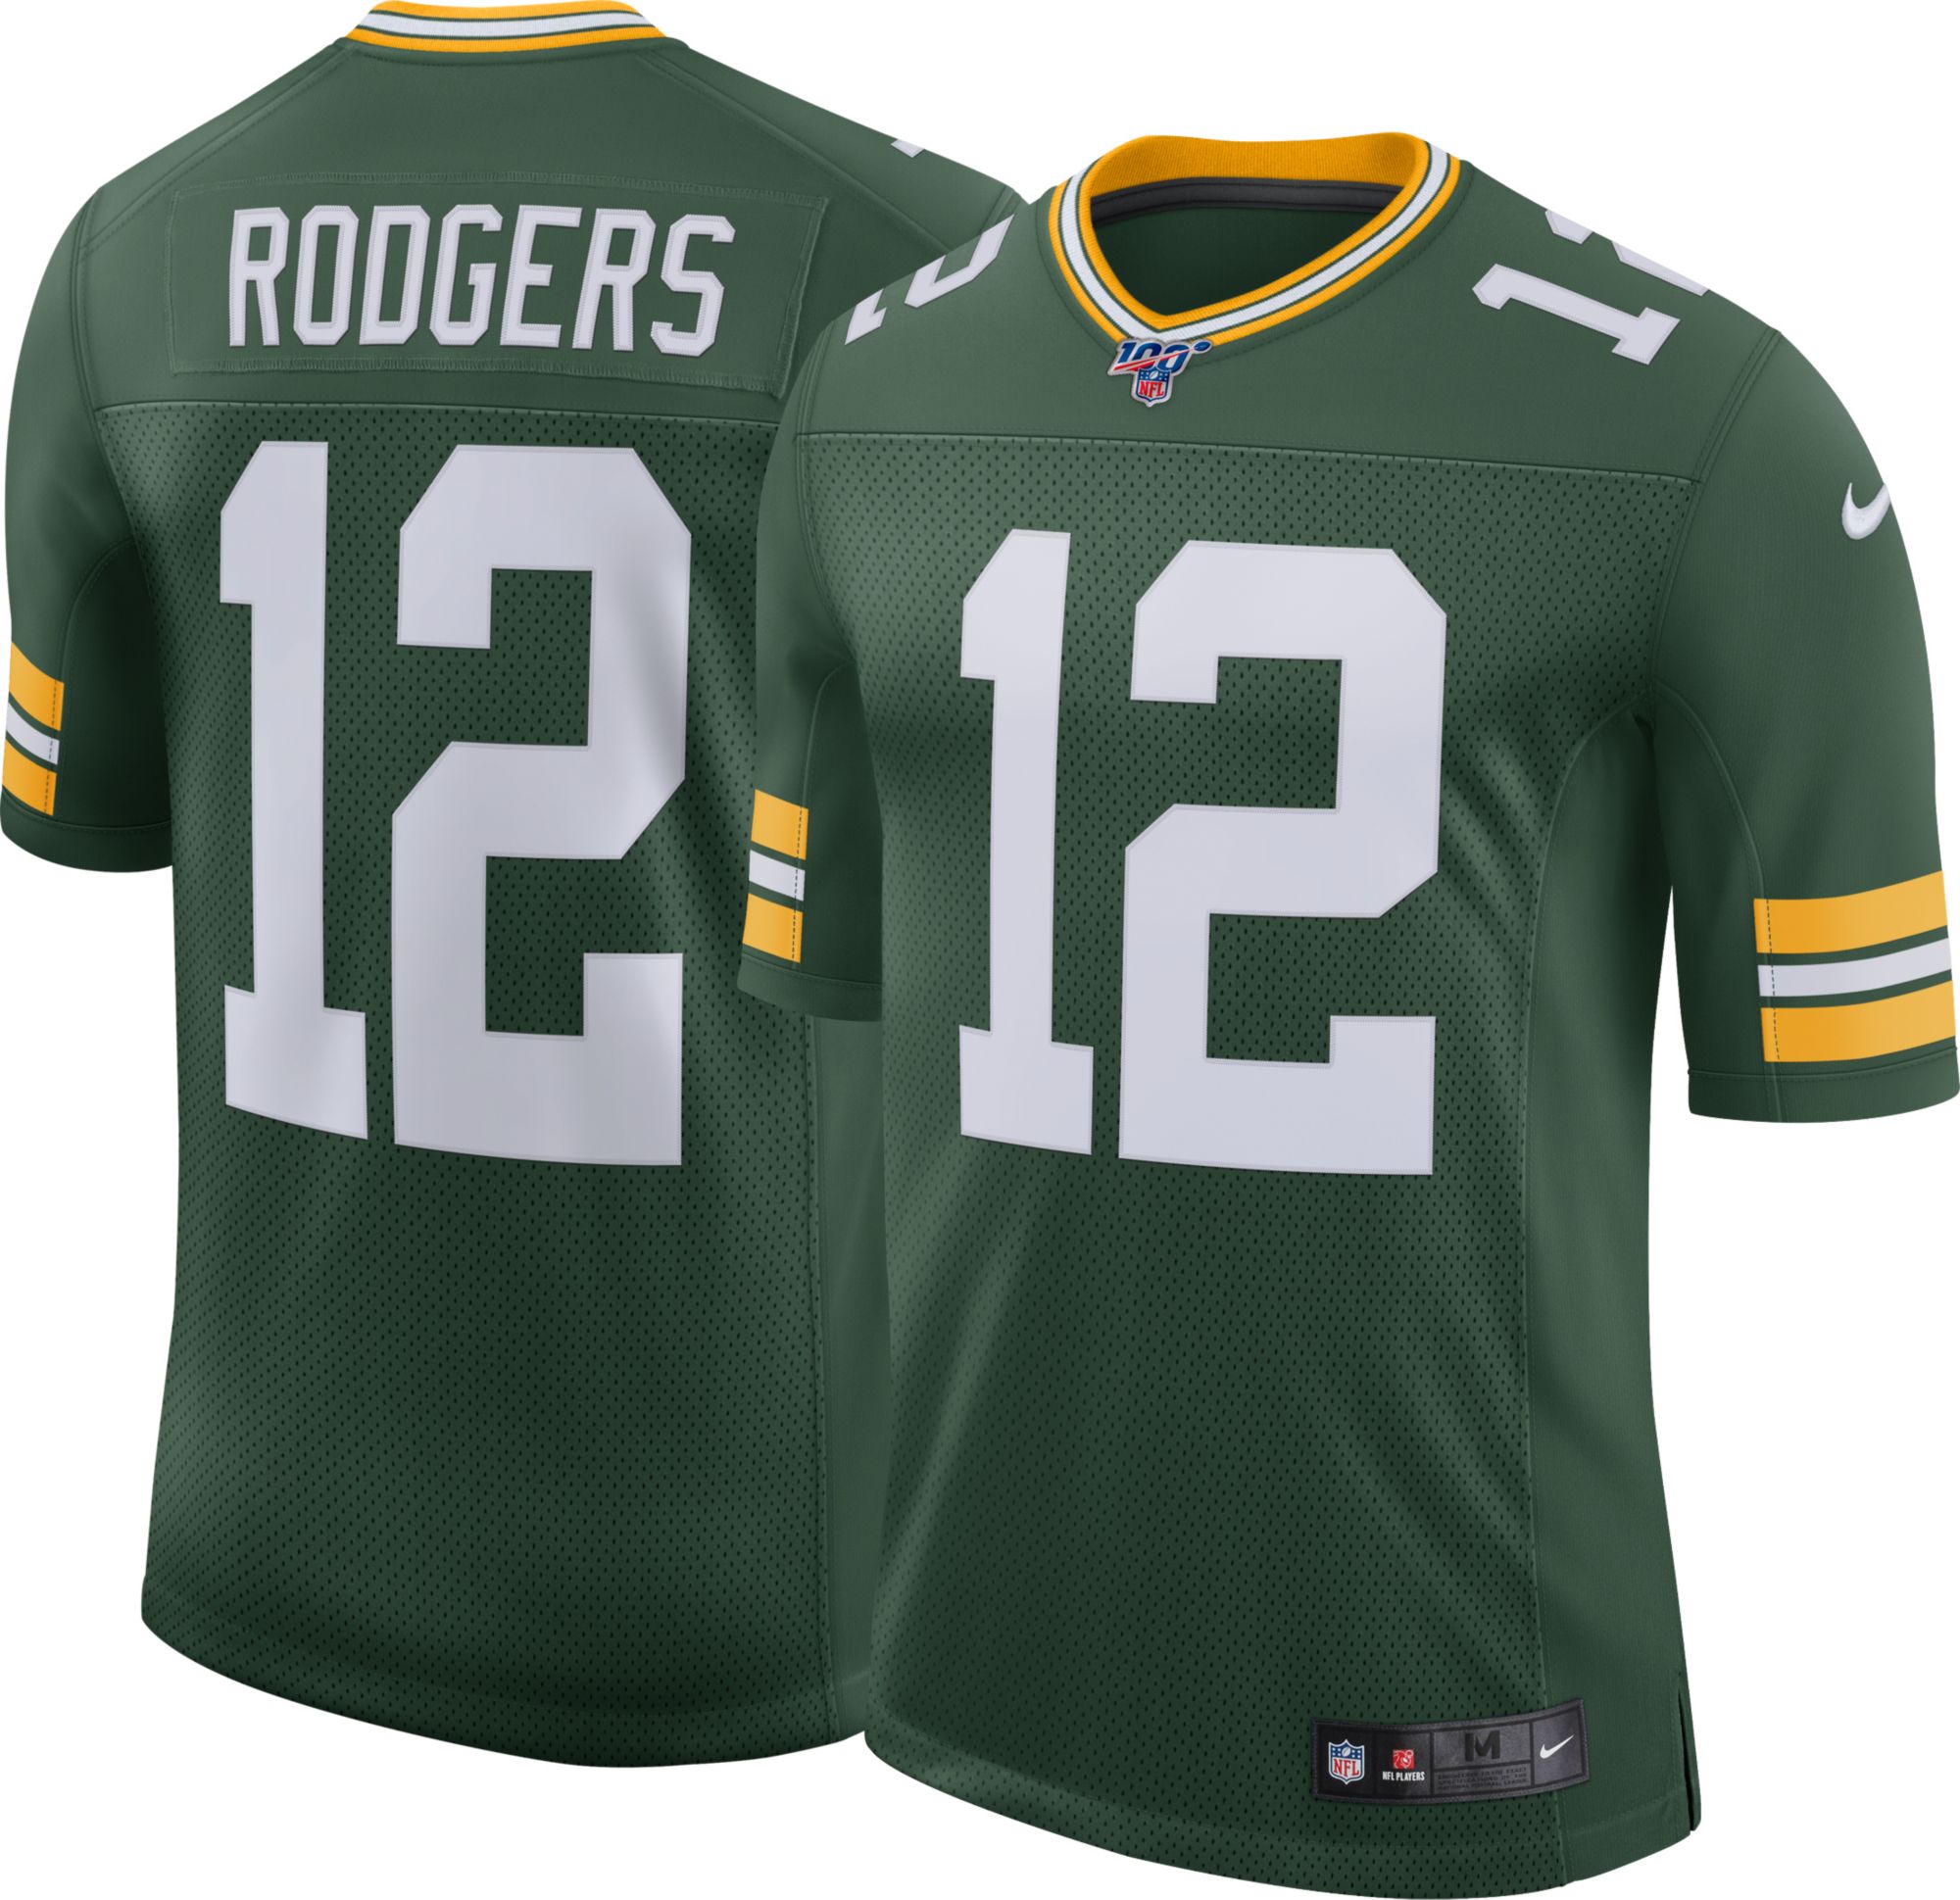 aaron rodgers jersey sewn numbers jersey on sale